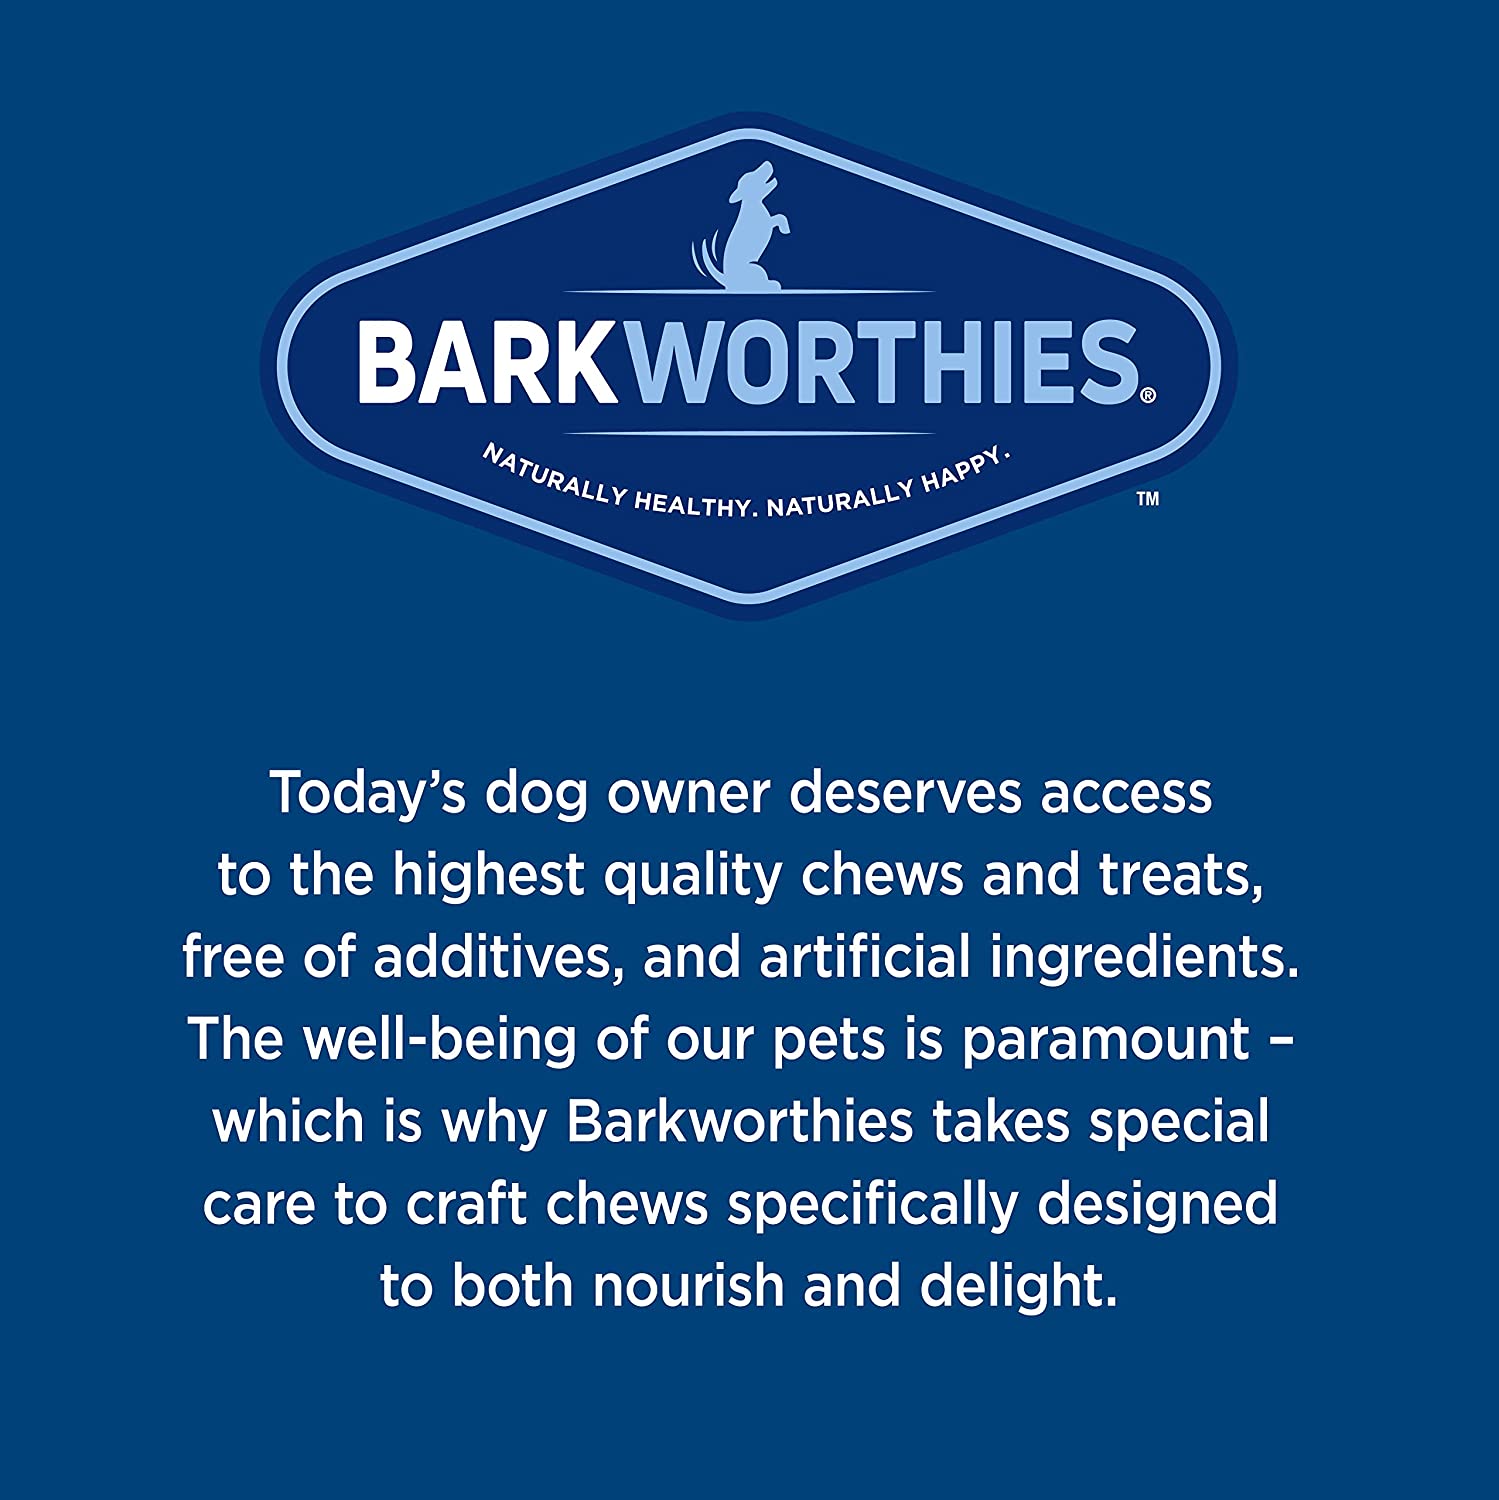 Barkworthies Healthy Dog Treats & Chews Variety Pack - Protein-Rich, All-Natural, Highly Digestible, Rawhide Alternative - Promotes Dental Health - Great Gift for All Dogs